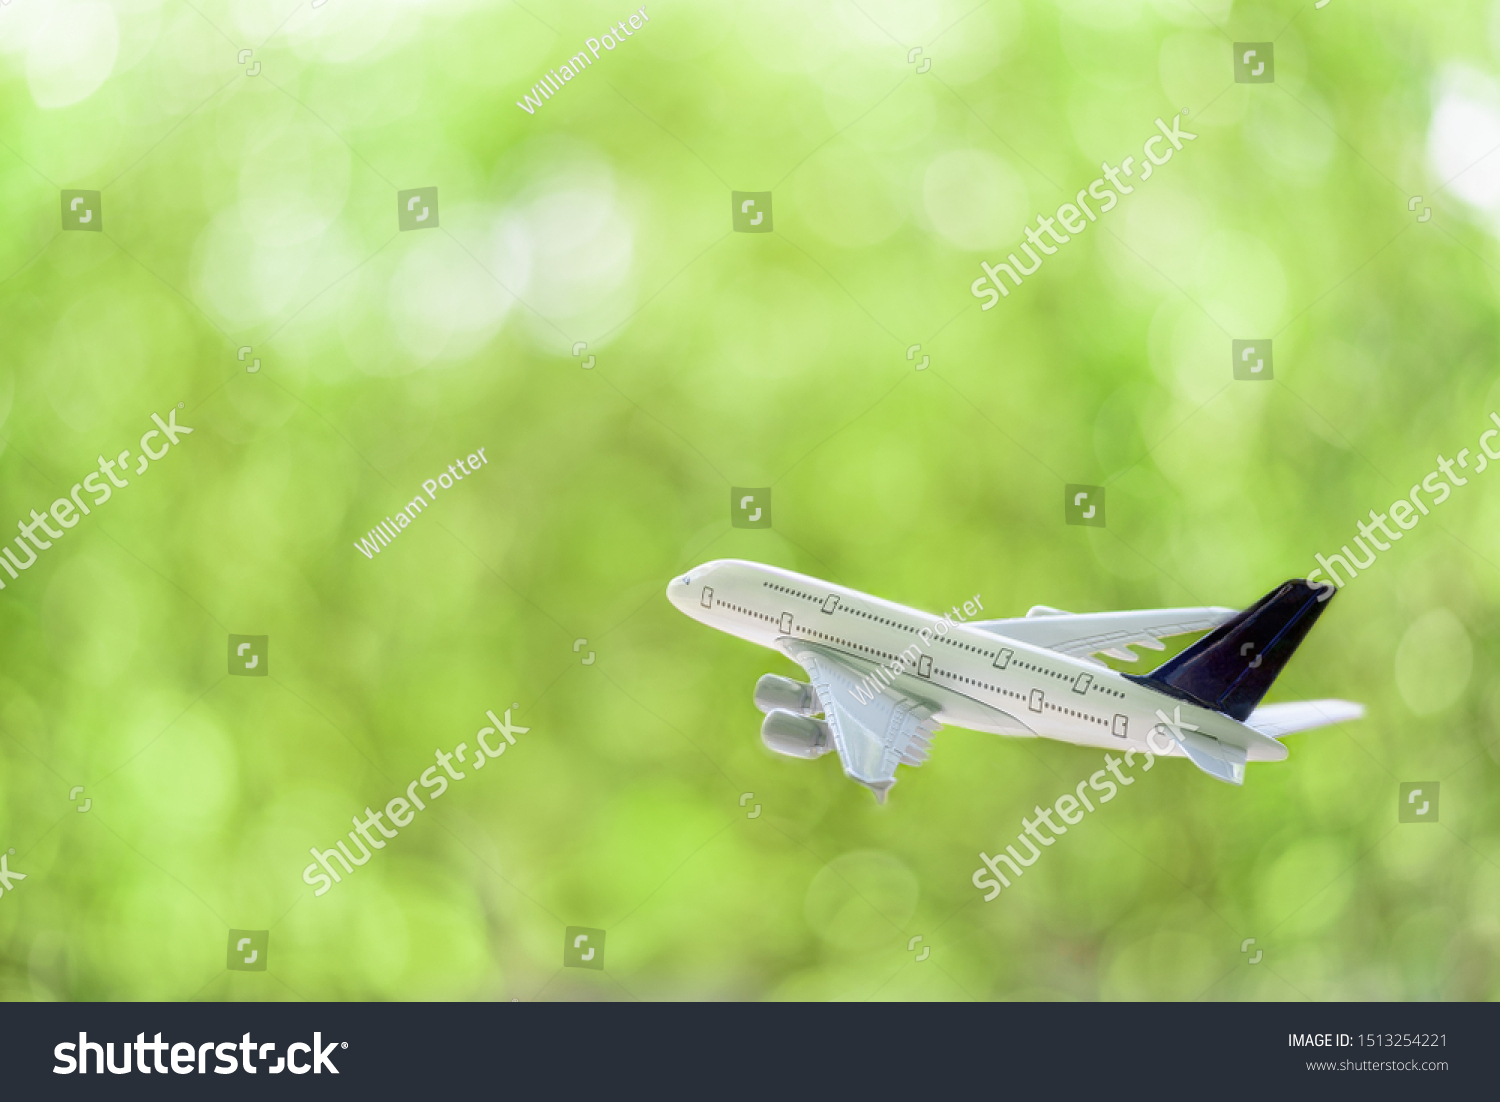 Freight forwarder, shipping courier agent service, aviation concept : White comercial plane / airplane fly over a green bokeh background, depict transporting of goods or parcel to overseas destination #1513254221